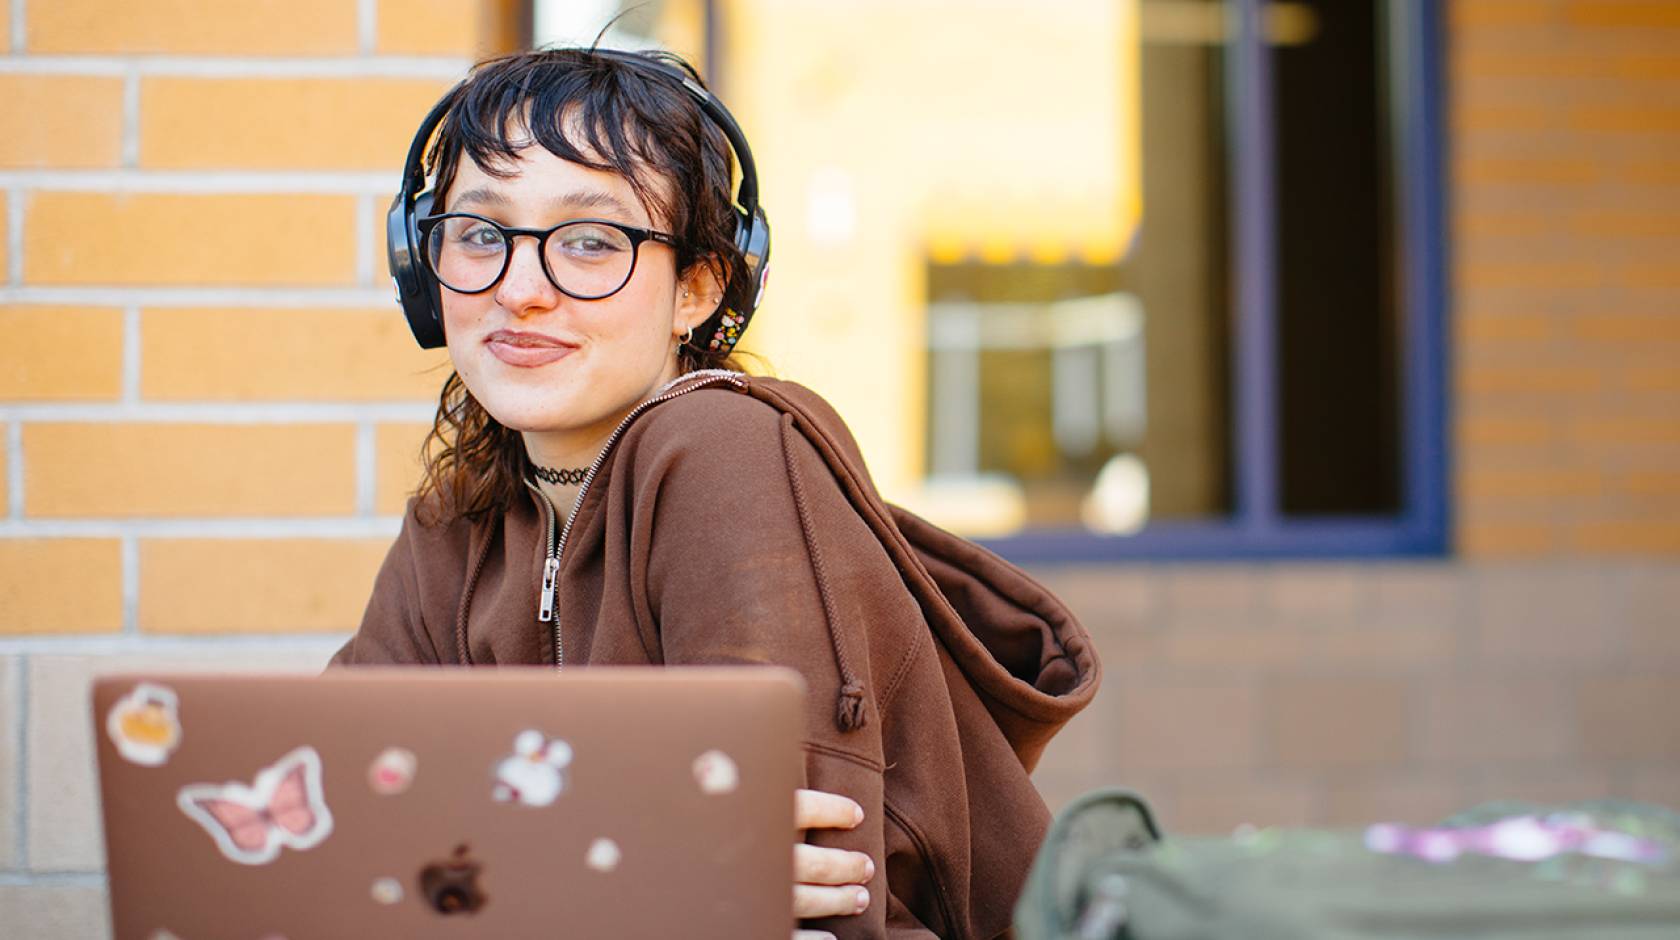 a student sits with an open laptop, smiling